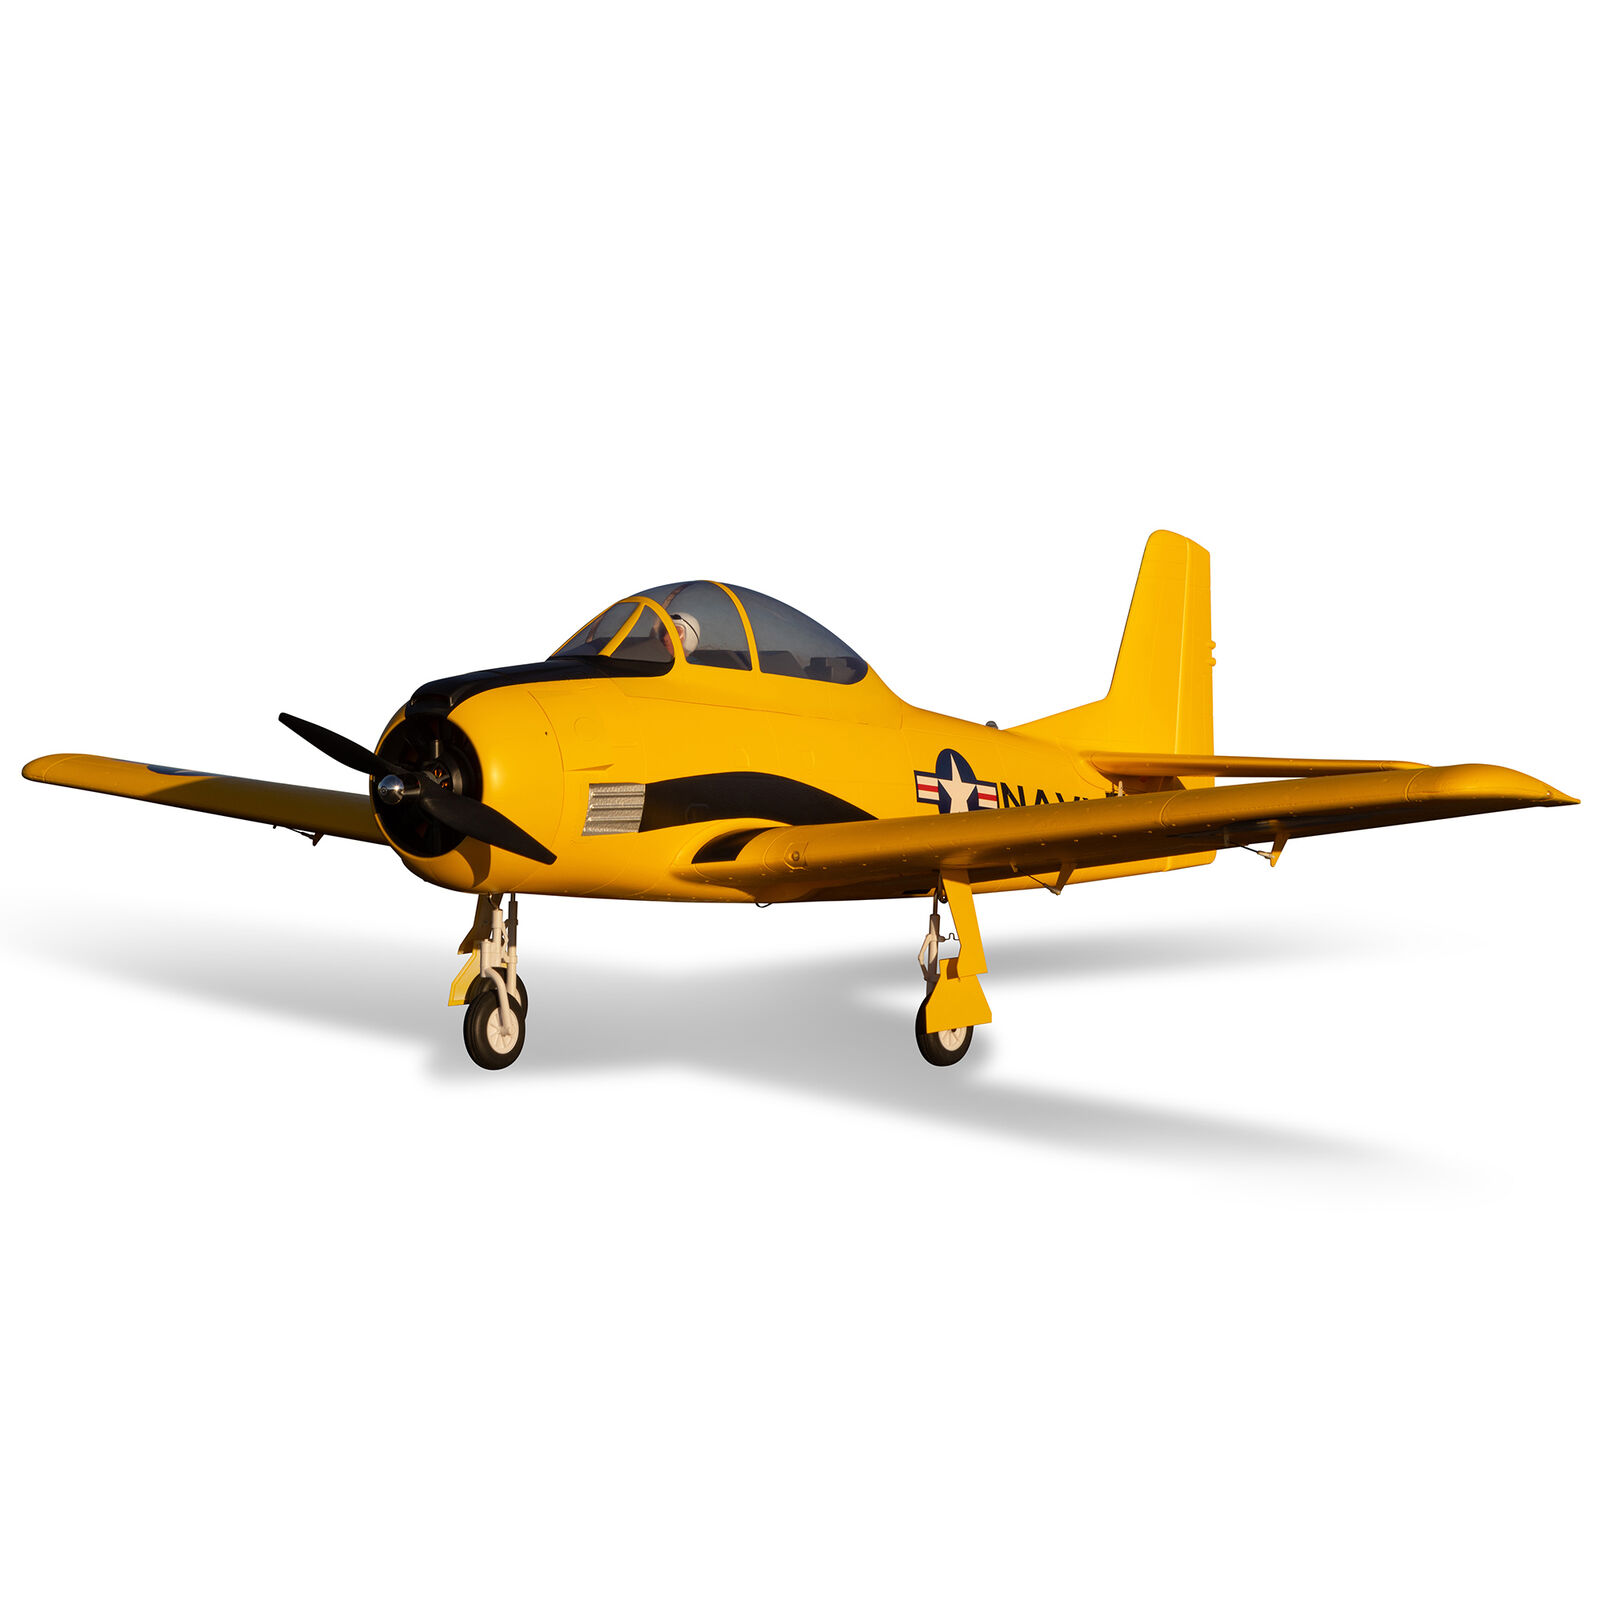 E-flite Carbon-Z T-28 Trojan 2.0m BNF Basic with AS3X and SAFE Select <font color="red"><b>(PREORDER)</b></font>